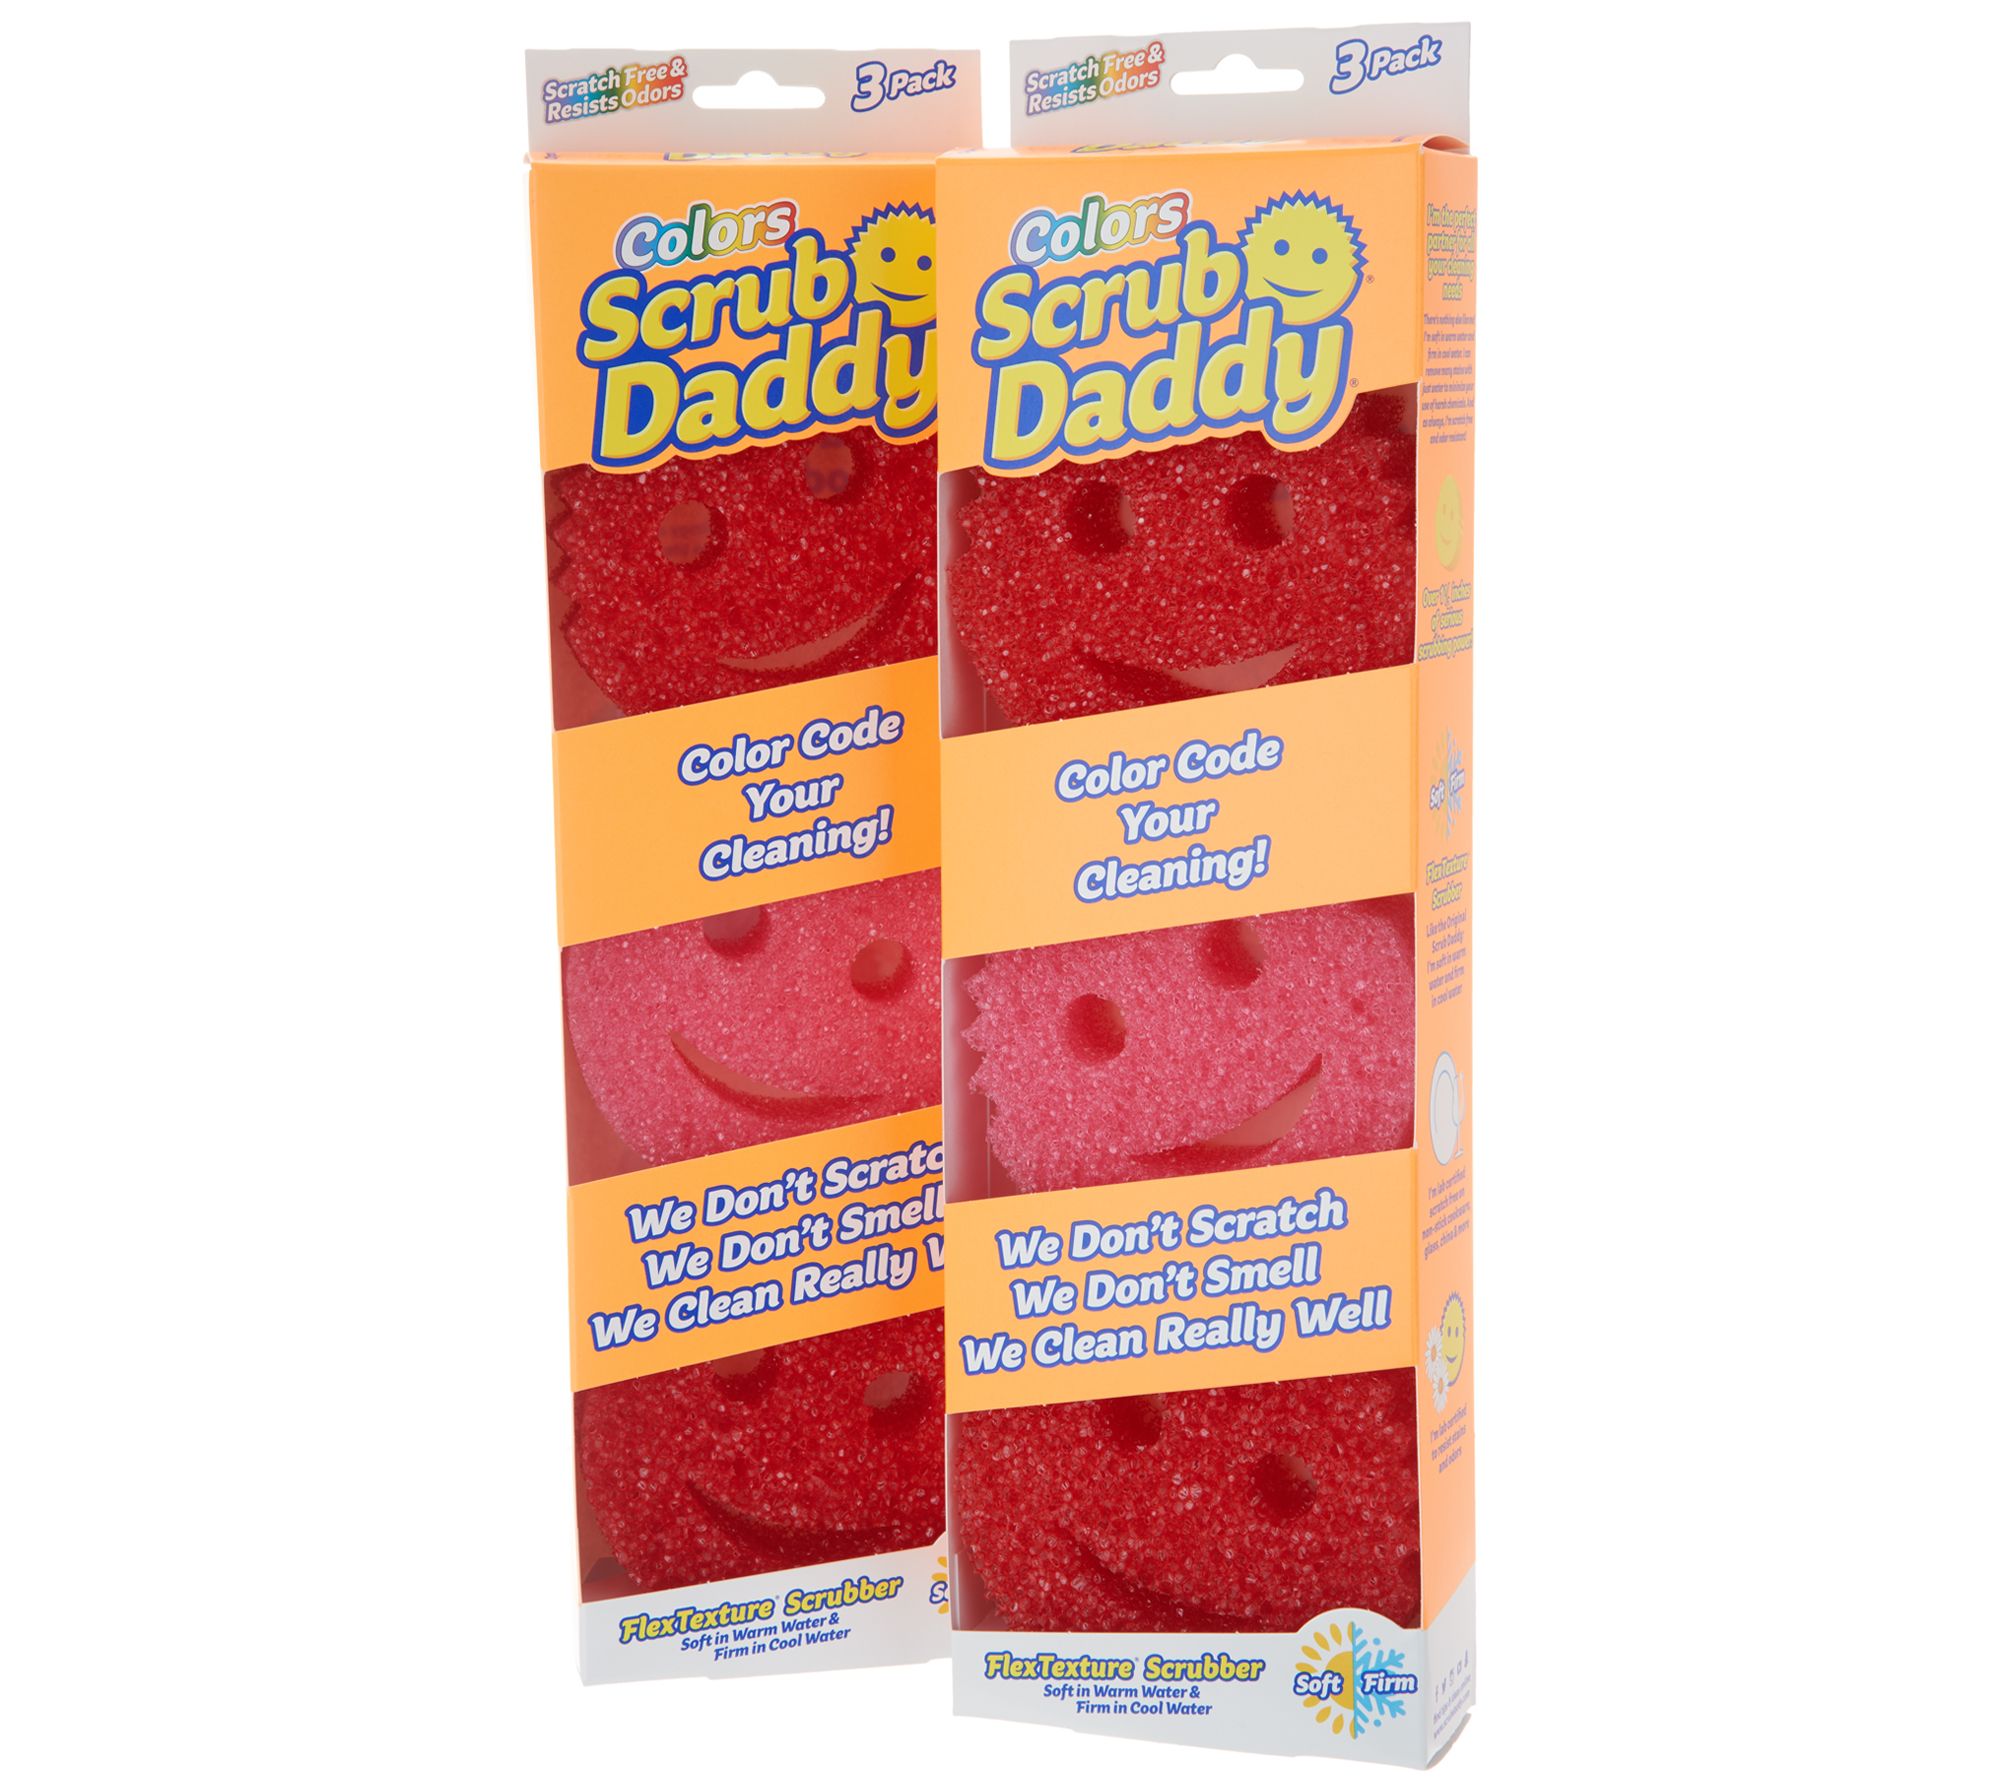 Buy Sponge Daddy Dual Sided Sponge and Scrubber Assorted